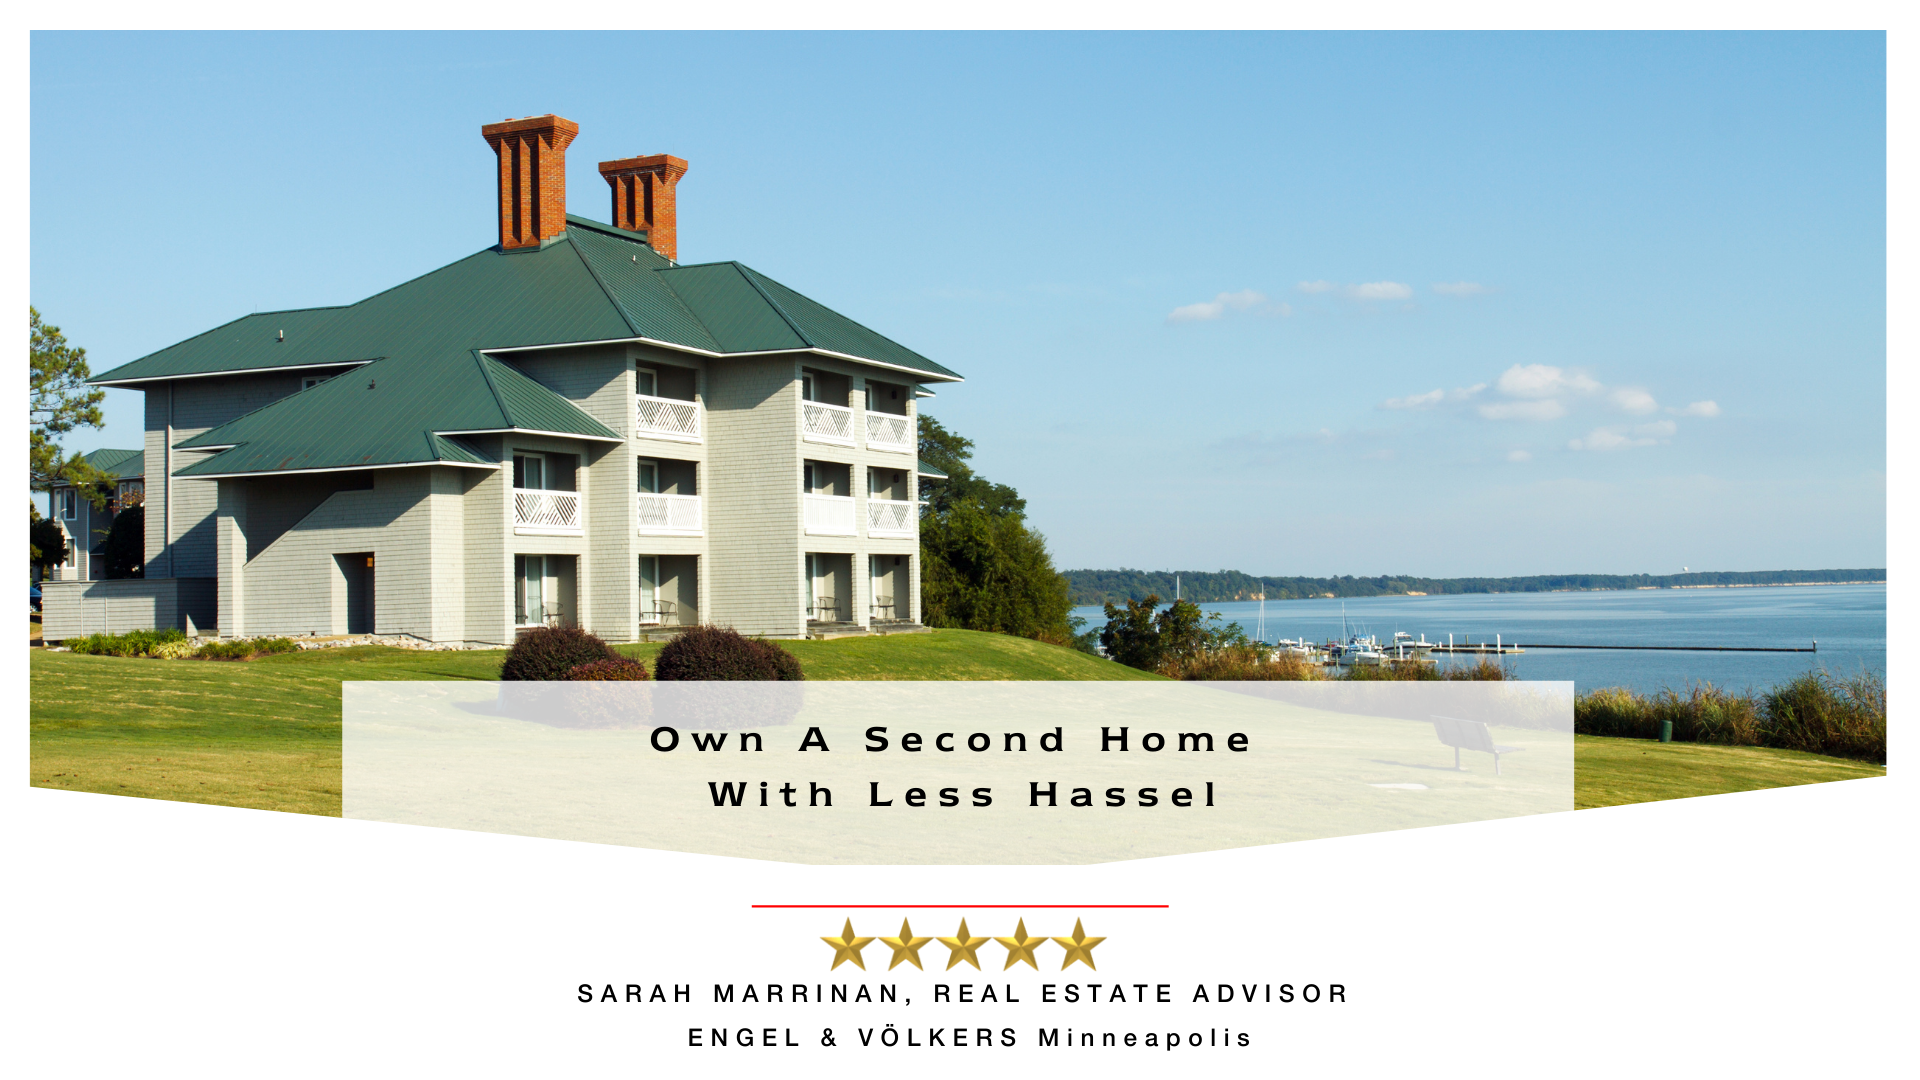 Own A Second Home With Less Hassel